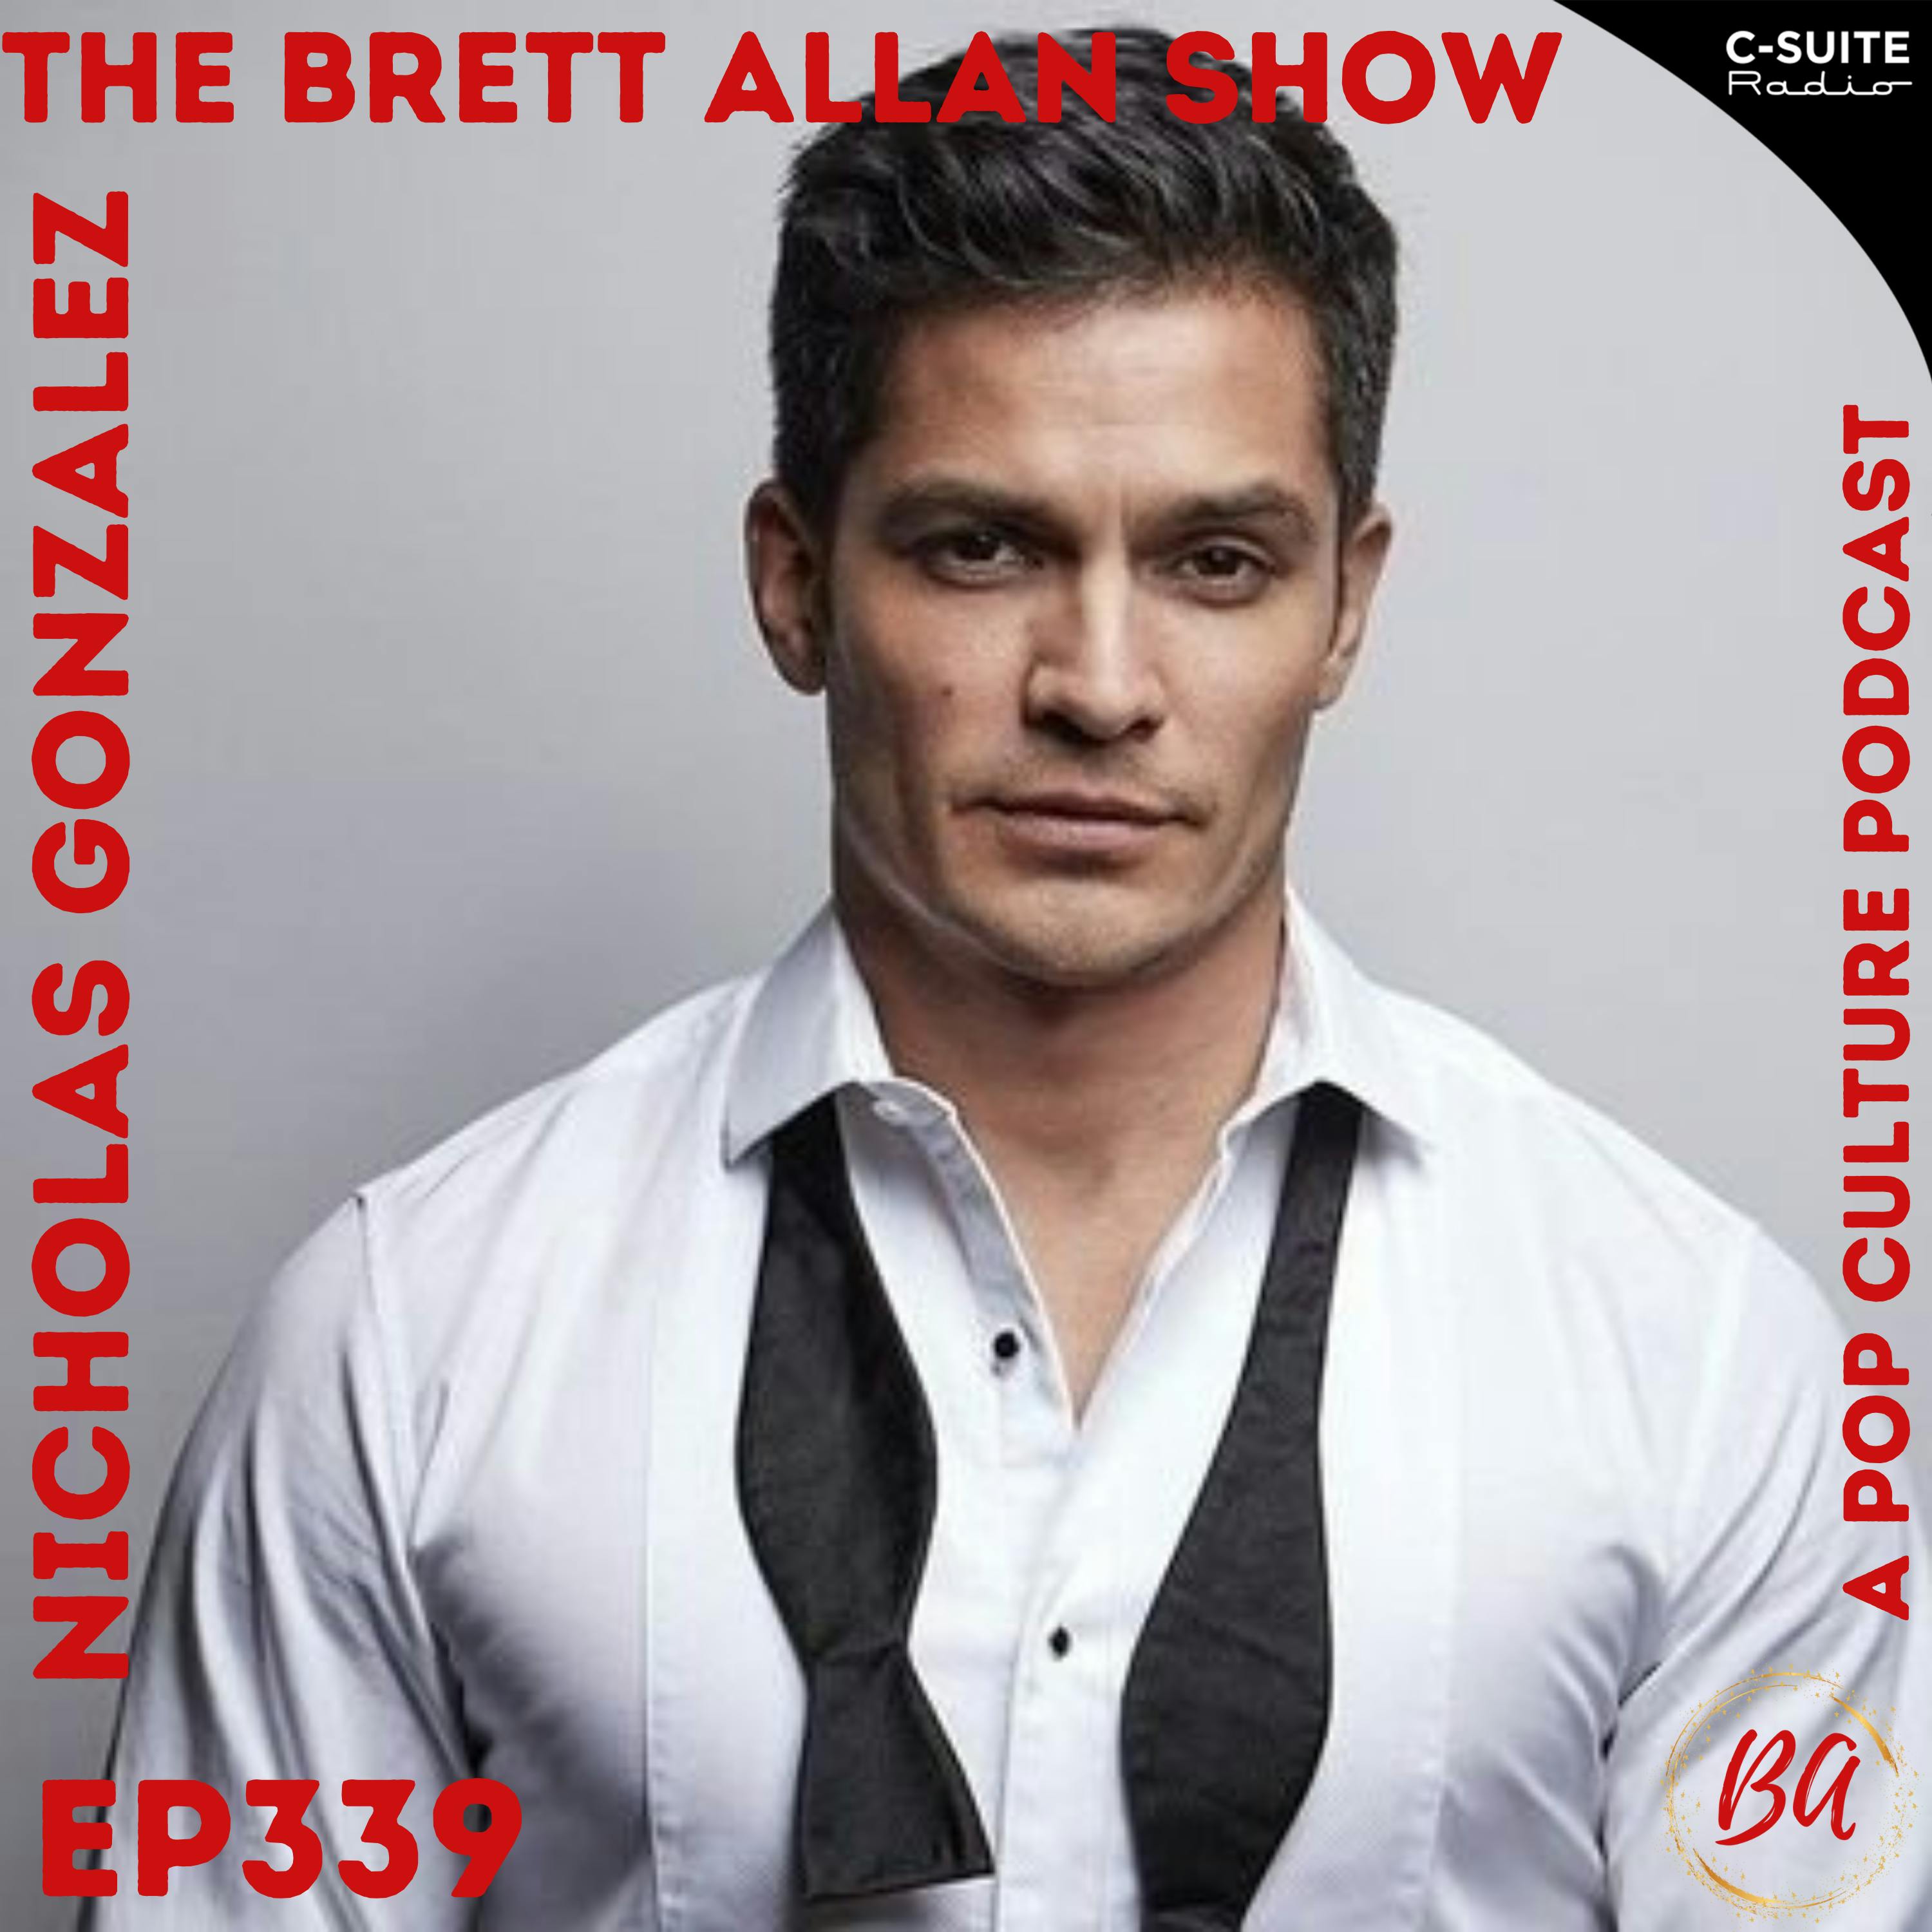 Actor Nicholas Gonzalez Talks All Things About His New Film "Borrego" and More! | Available Now! Image